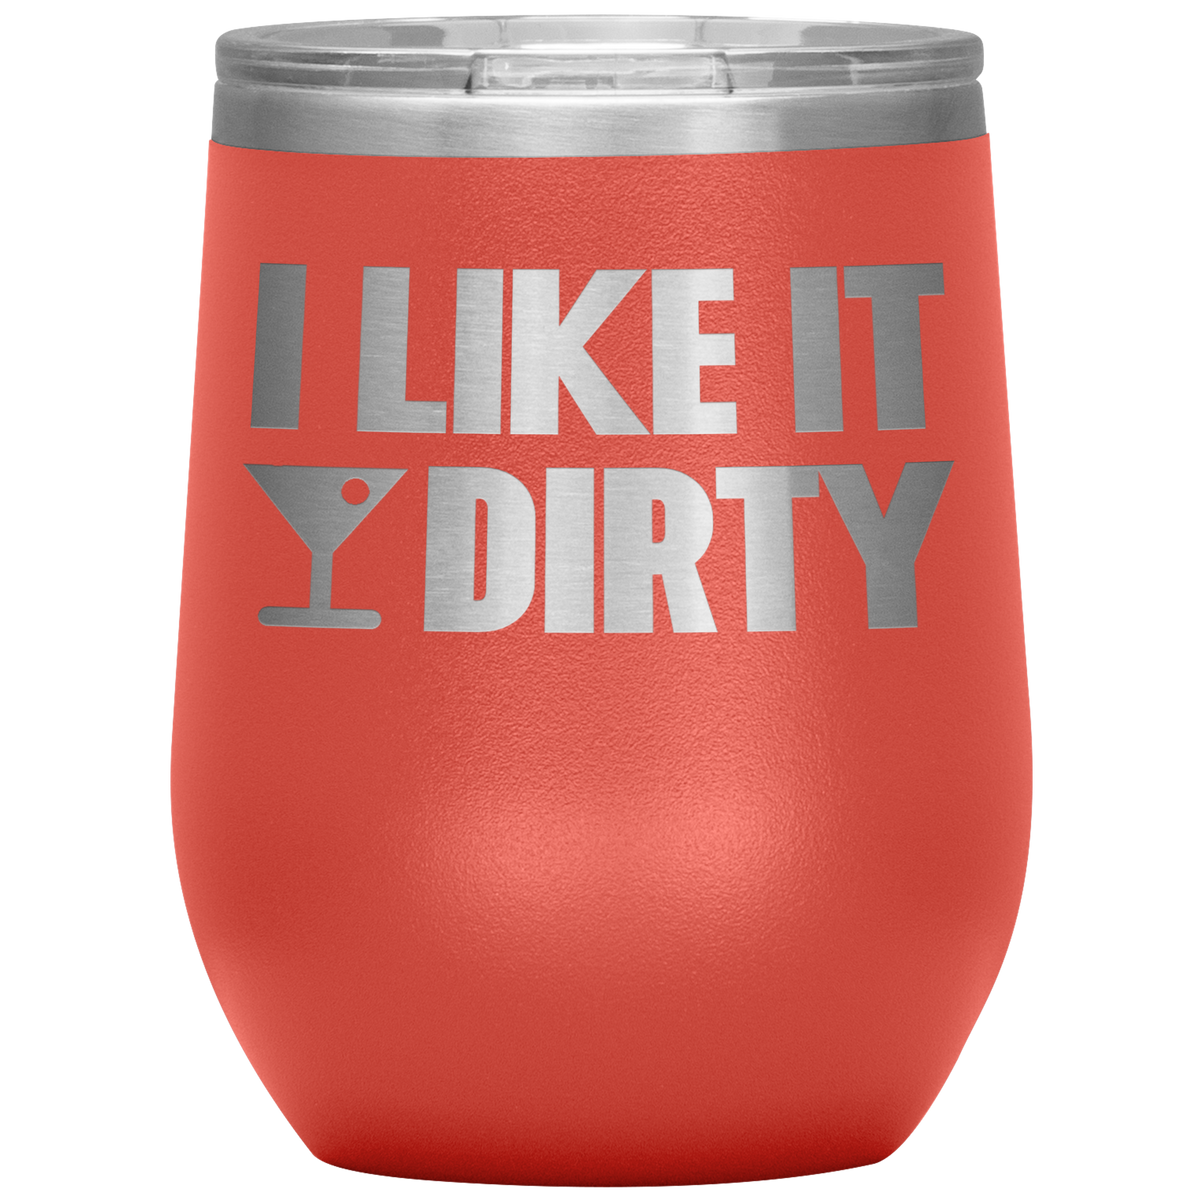 Martini Lover Gift I Like It Dirty Cocktail Tumbler